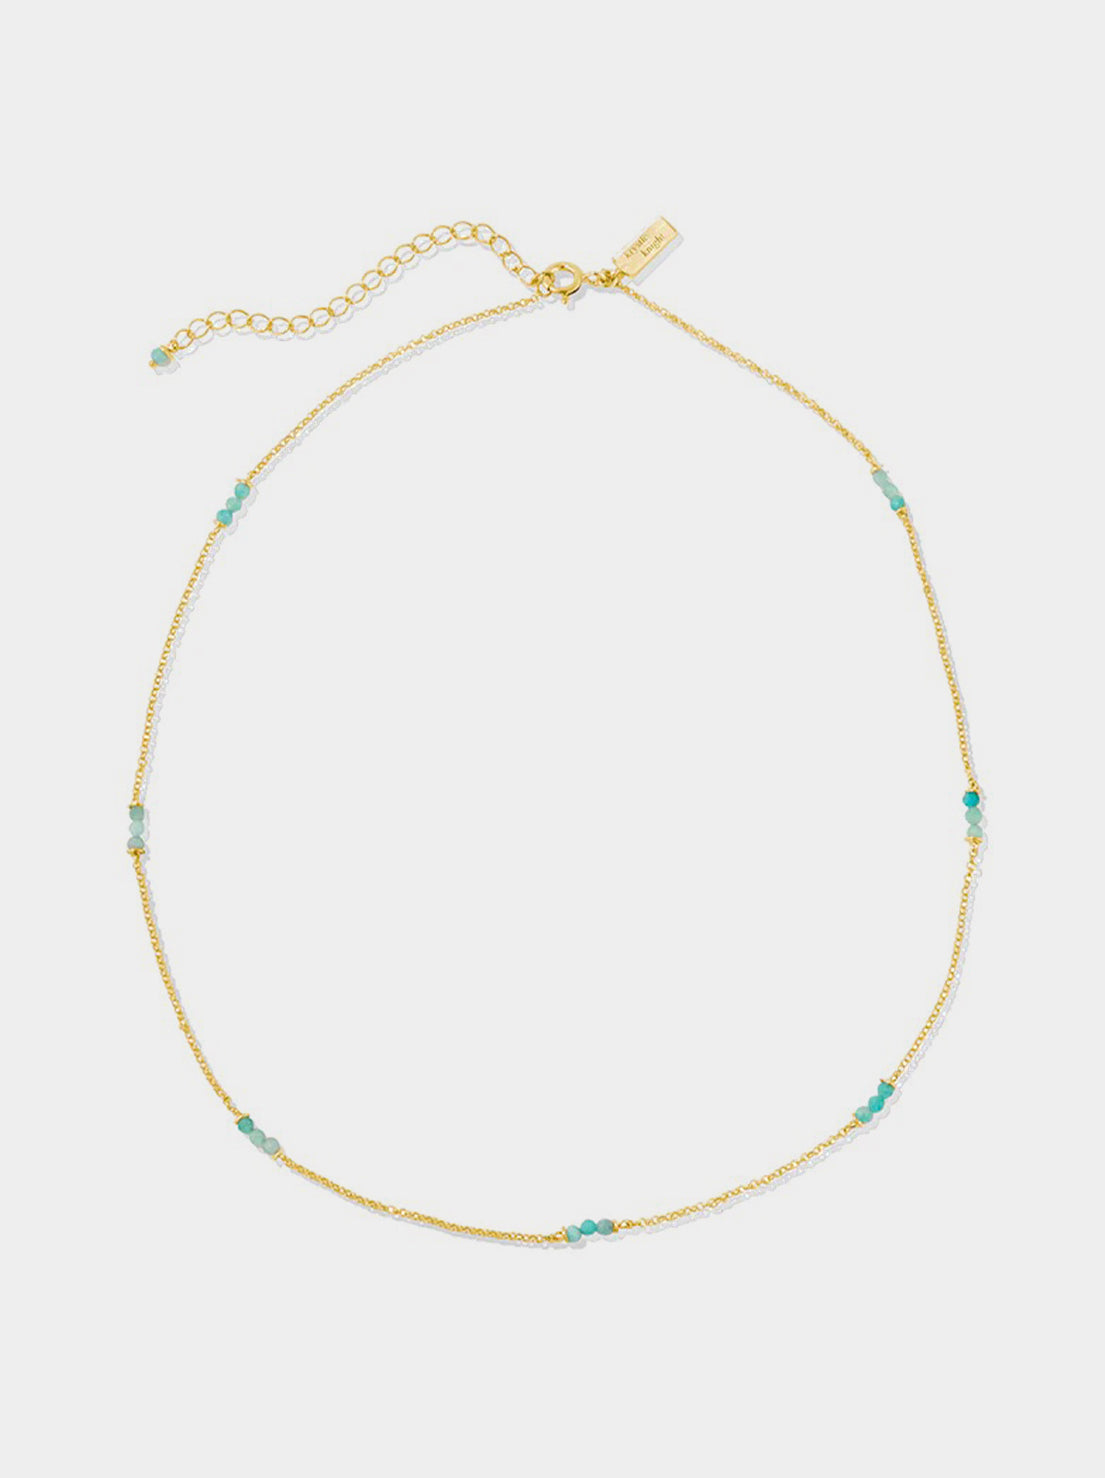 Krystle Knight - Infinite Courage Necklace - Amazonite - Gold Plated